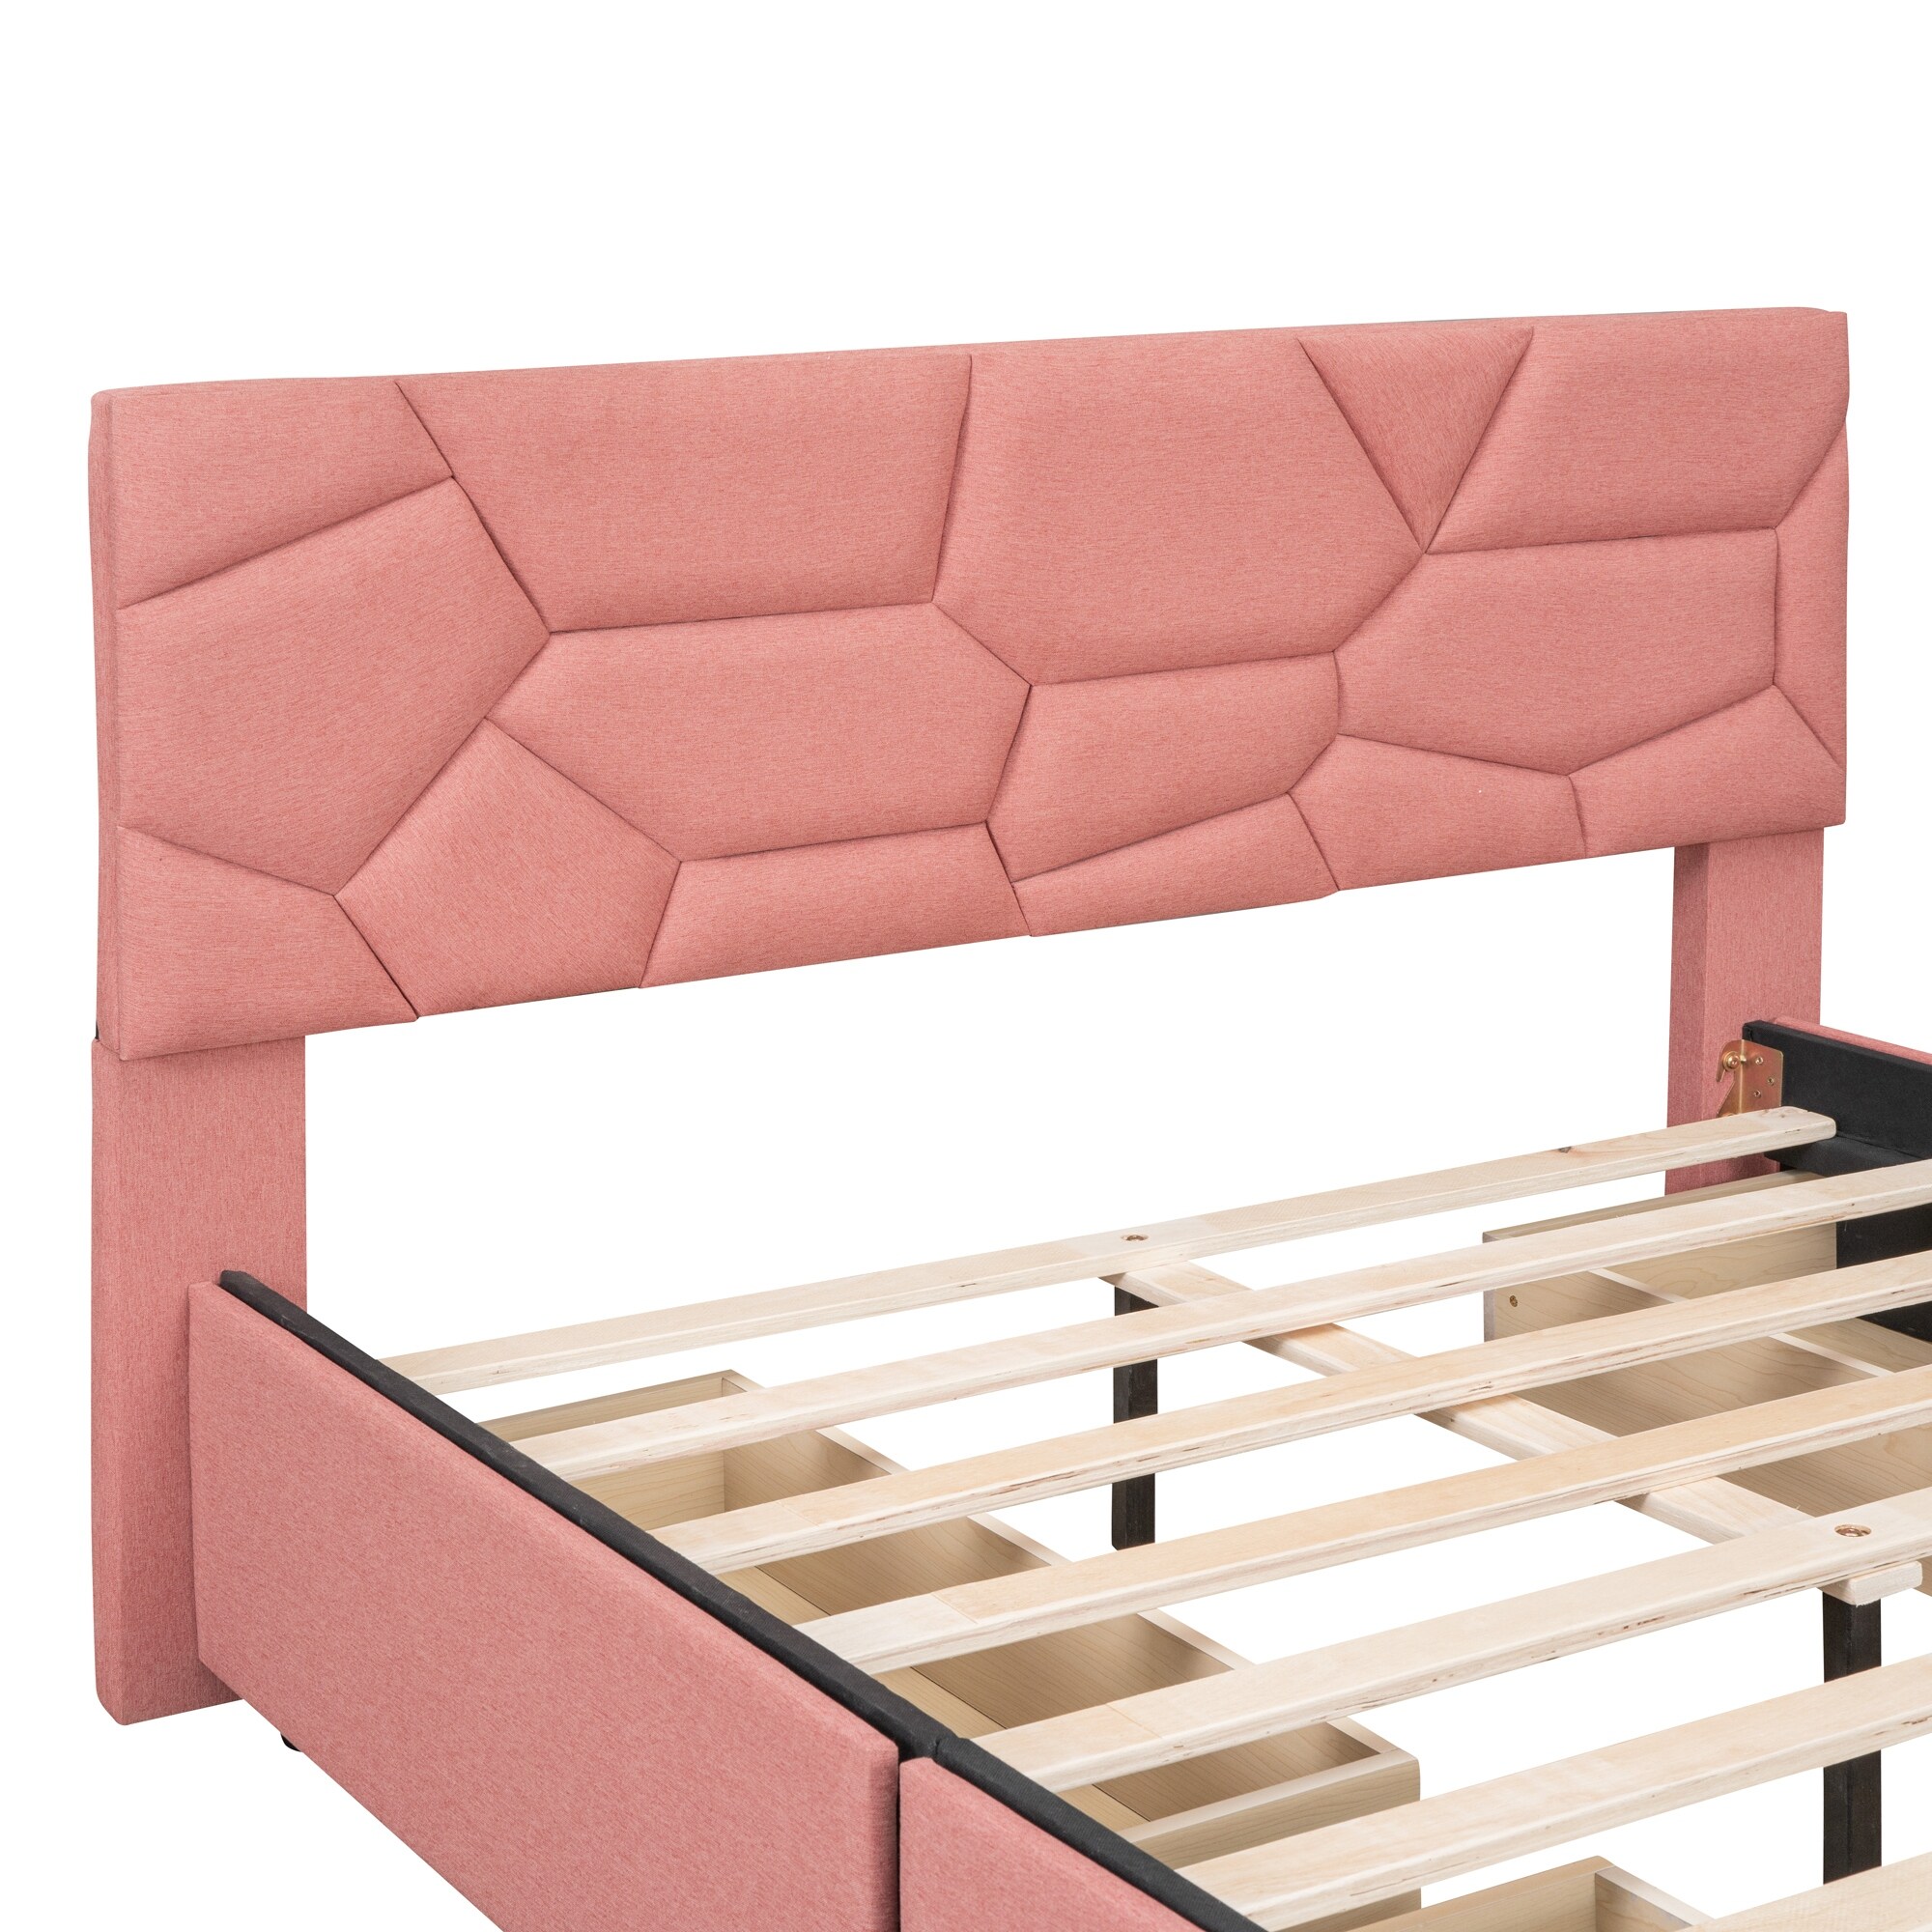 Linen Fabric Full Size Upholstered Platform Bed with4 Drawers and Brick Pattern Heardboard.